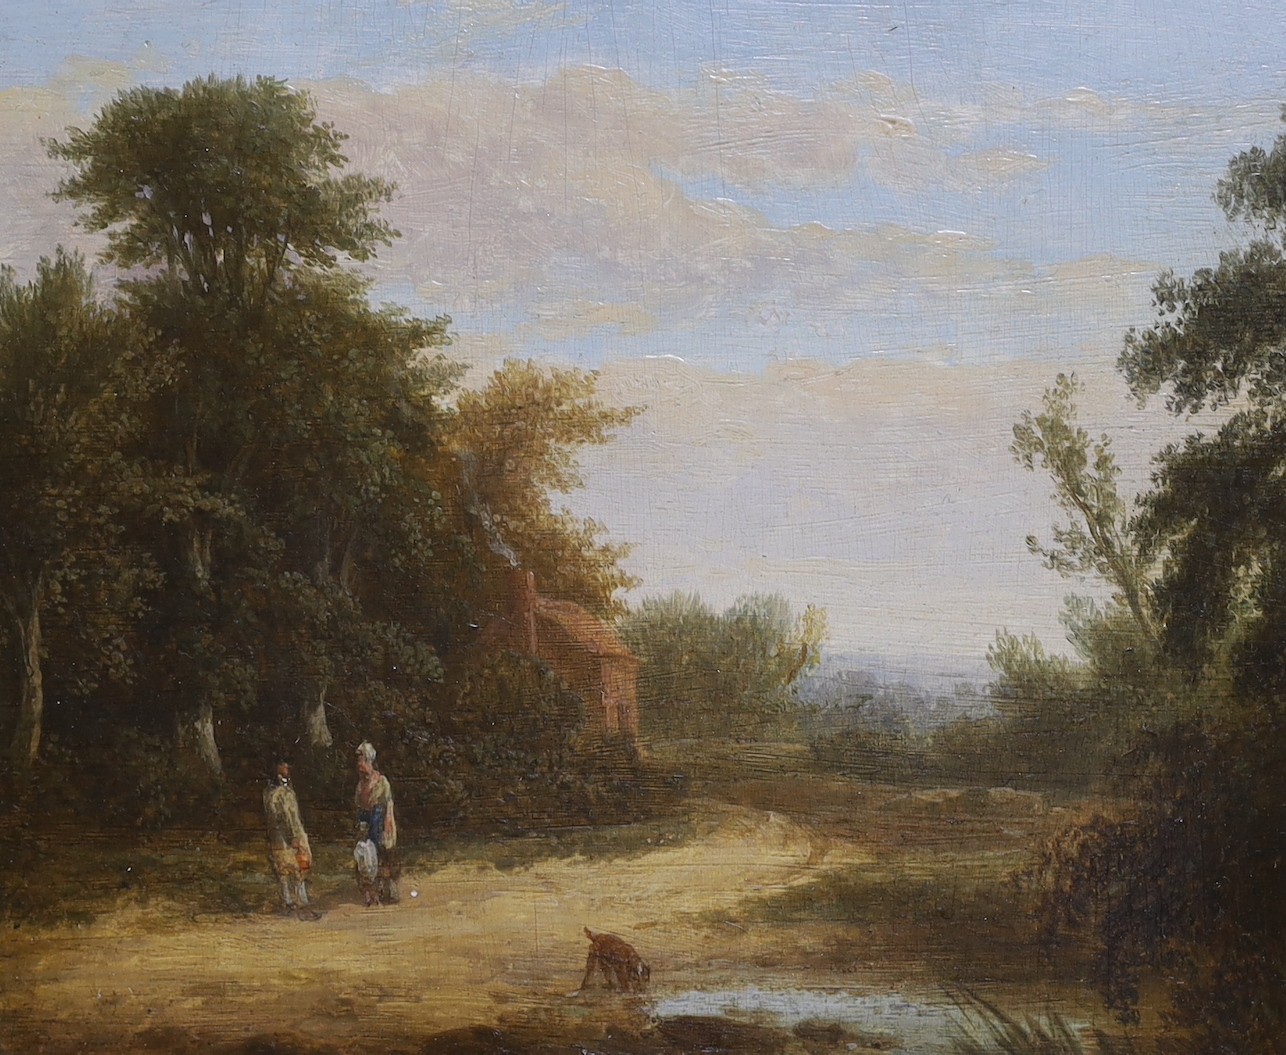 Circle of Ramsay Richard Reinage RA (1775-1862), oil on wooden panel, Figures in a landscape, 15 x 18cm